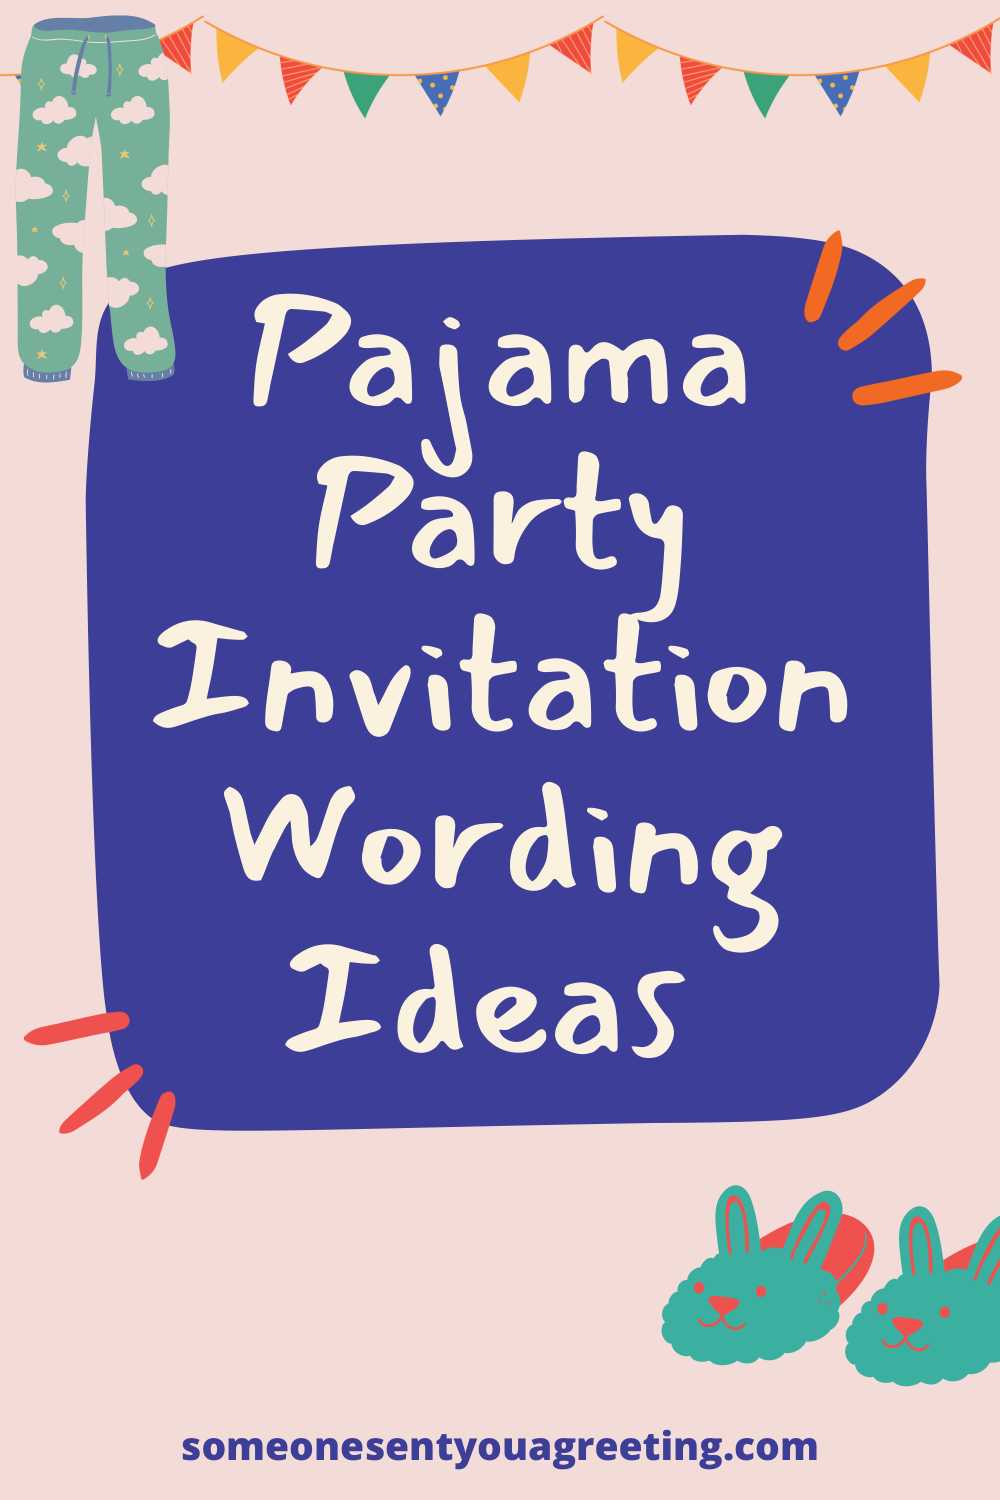 17 of the Best Pajama Party Invitation Wording Ideas - Someone Sent You A  Greeting